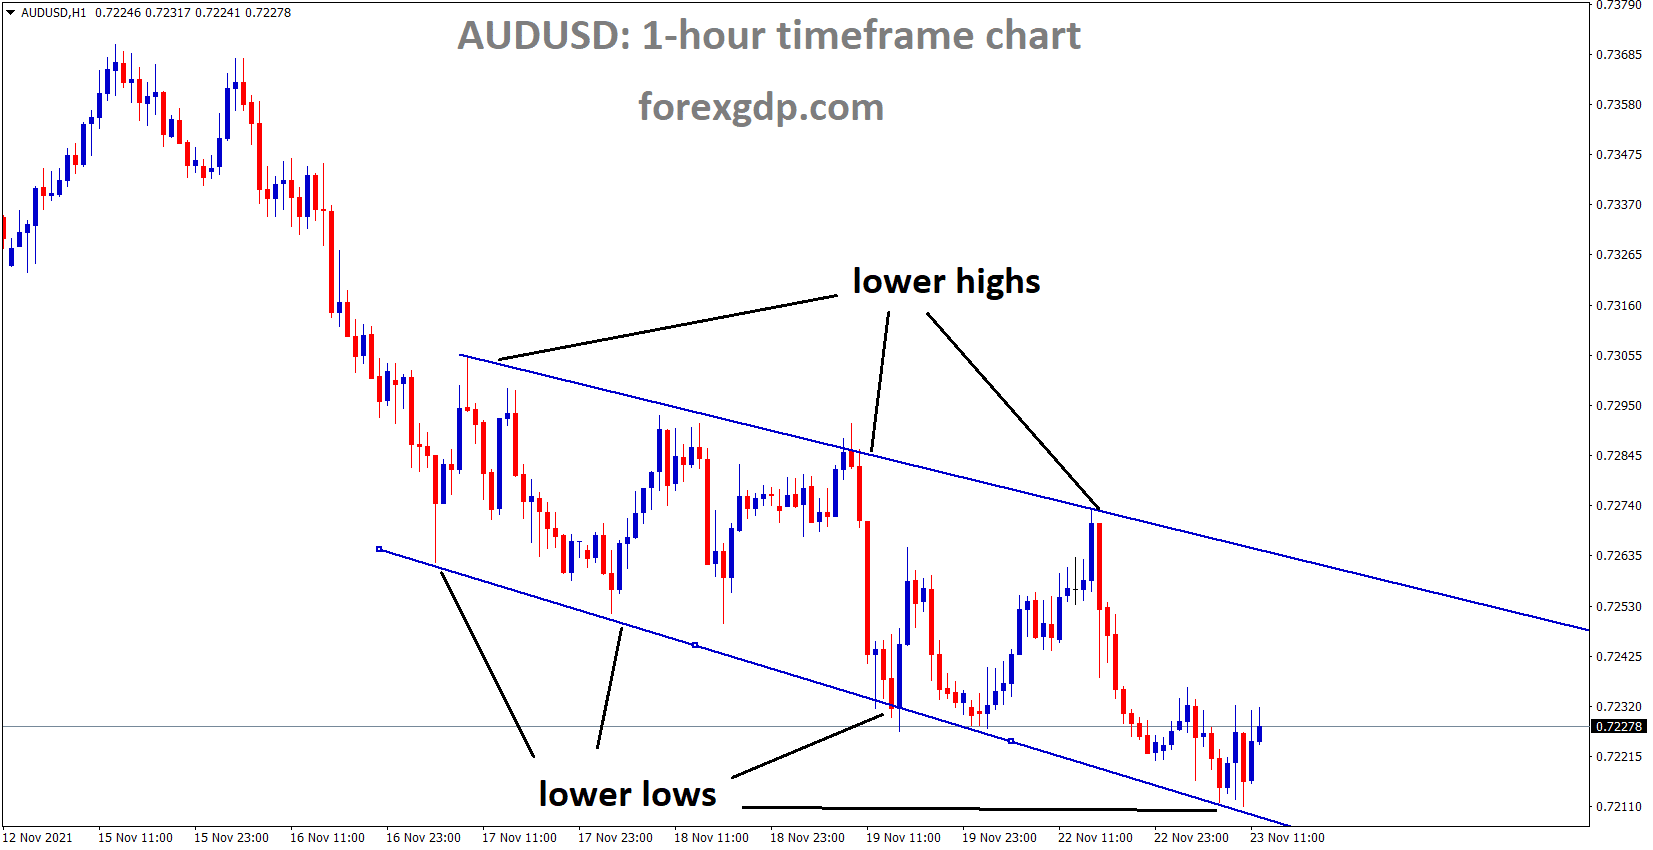 AUDUSD is moving in the Descending channel and the market is rebounding from the lower low of the channel